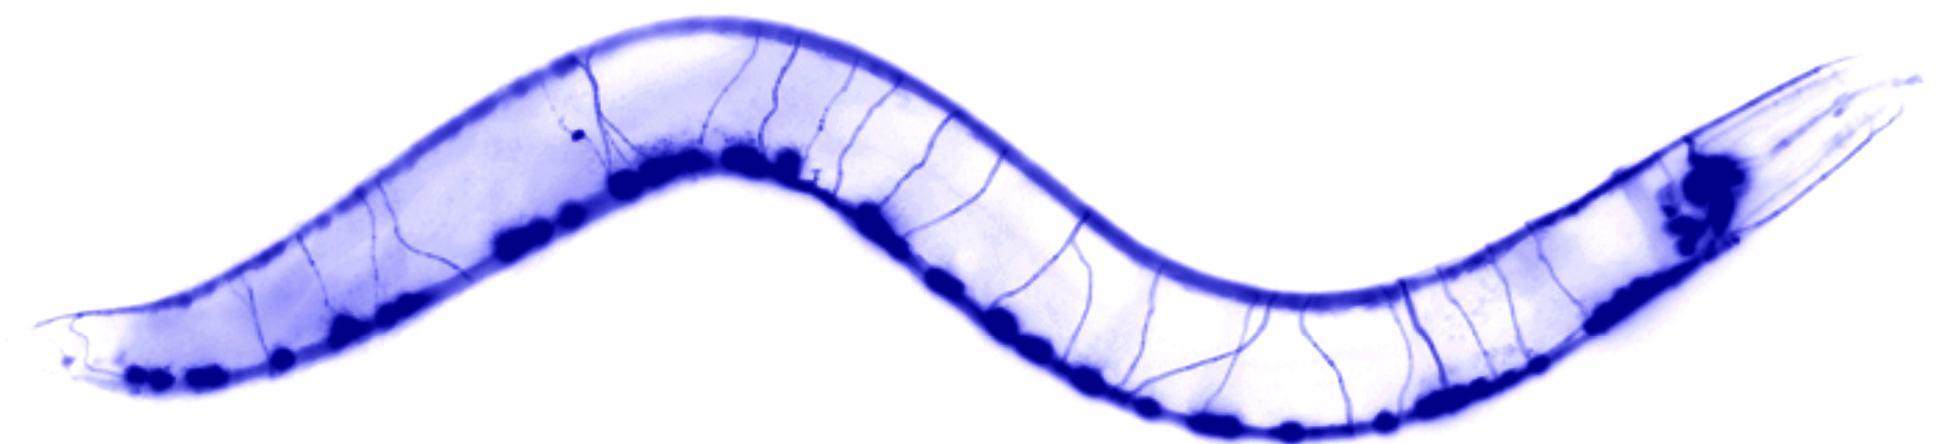 A NEMATODE WORM ILLUMINATED WITH FLUORESCENT MARKERS